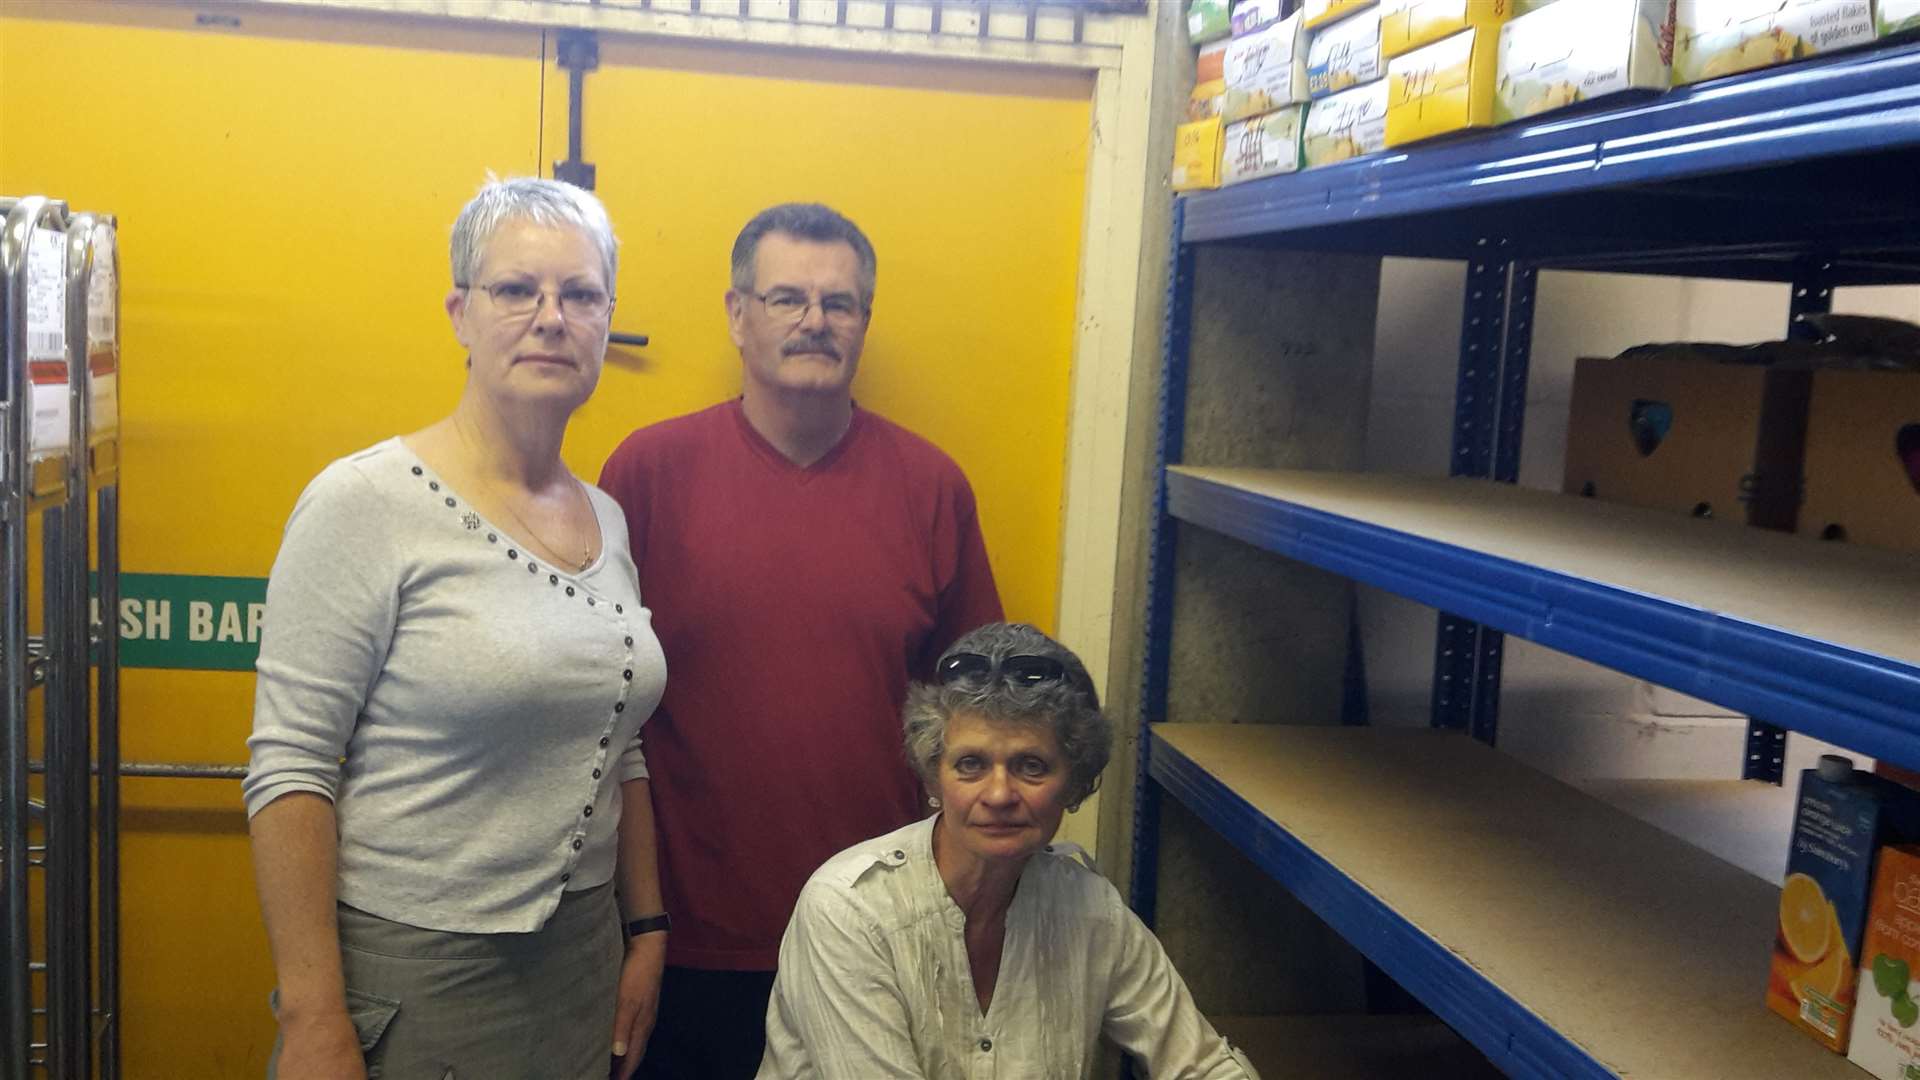 Deal's Area Emergency Foodbank needs donations to fill its empty shelves